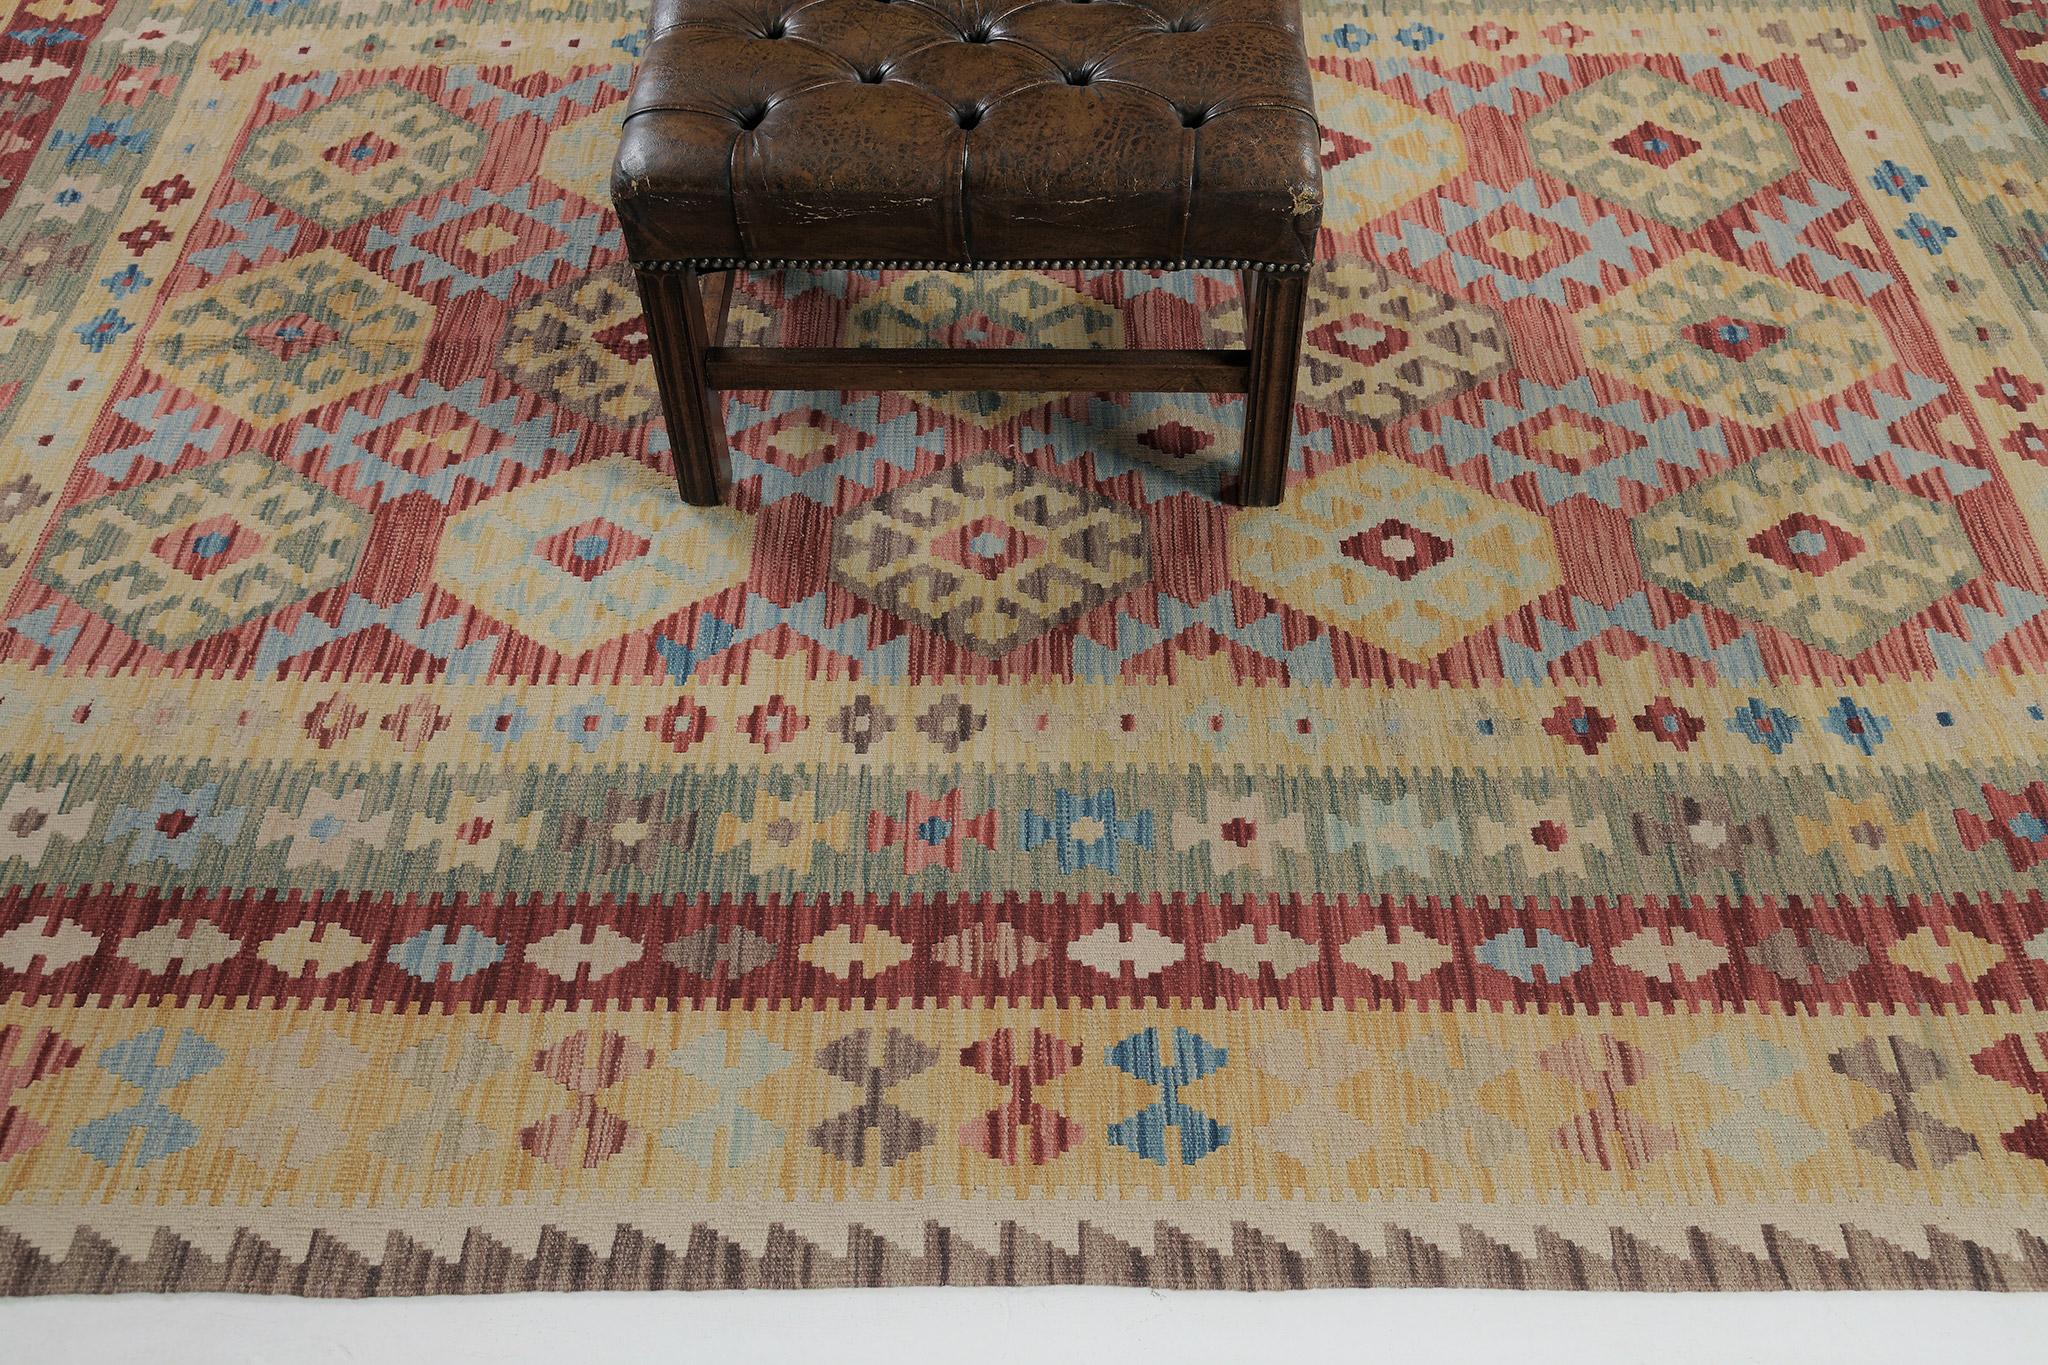 Tribal symbolic motifs are featured and the center of the charm. Series of geometrical bands along the fringe of this impressive flat weave Kilim. Using vibrant palettes makes it more wonderful and enticing for conventional and modern-inspired